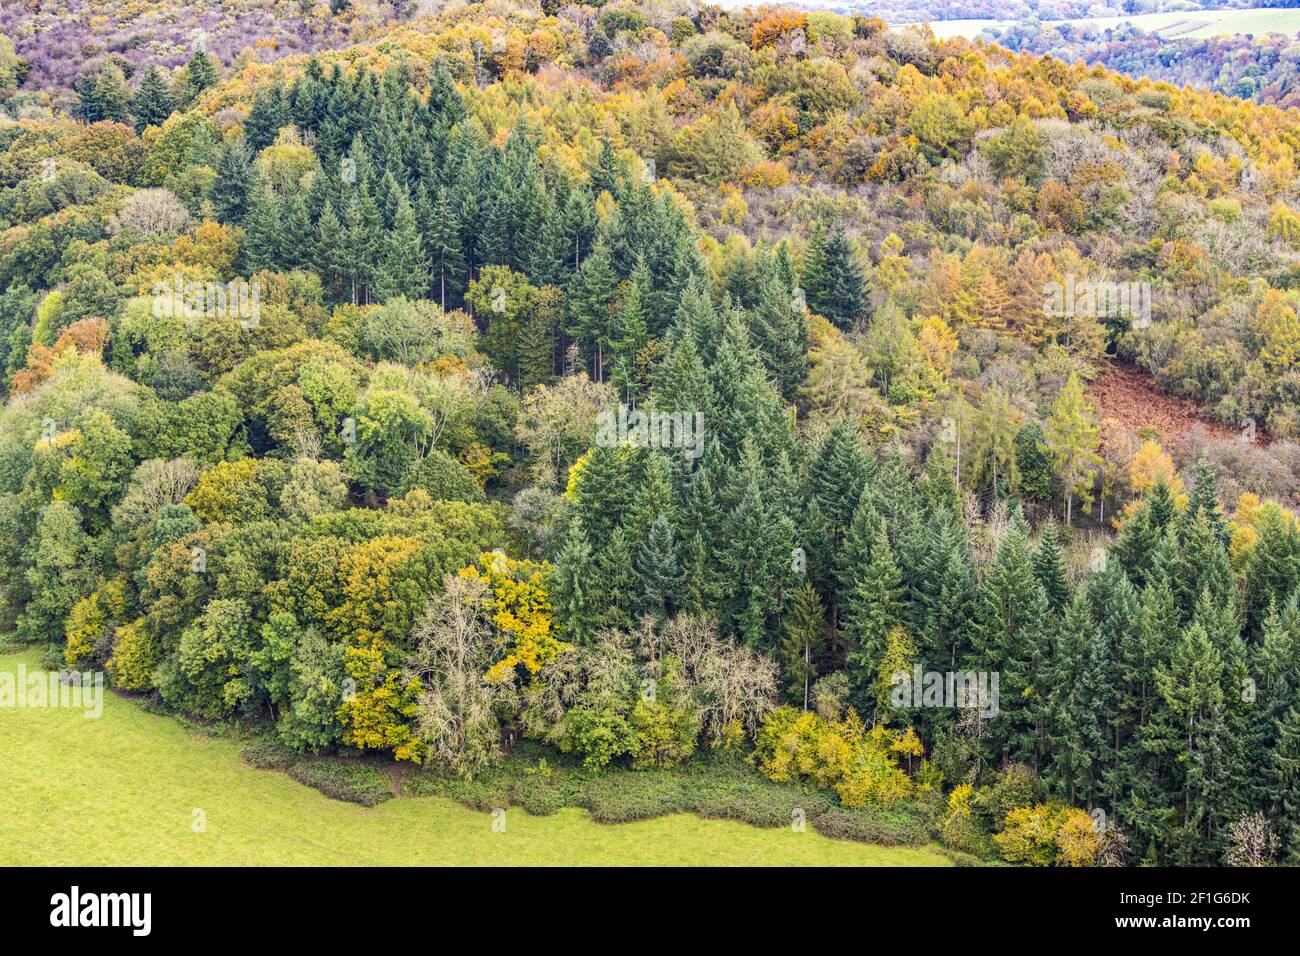 Autumn in the Wye Valley - Mixed woodland on the slopes of Coppett Hill viewed from Symonds Yat Rock, Herefodshire UK Stock Photo